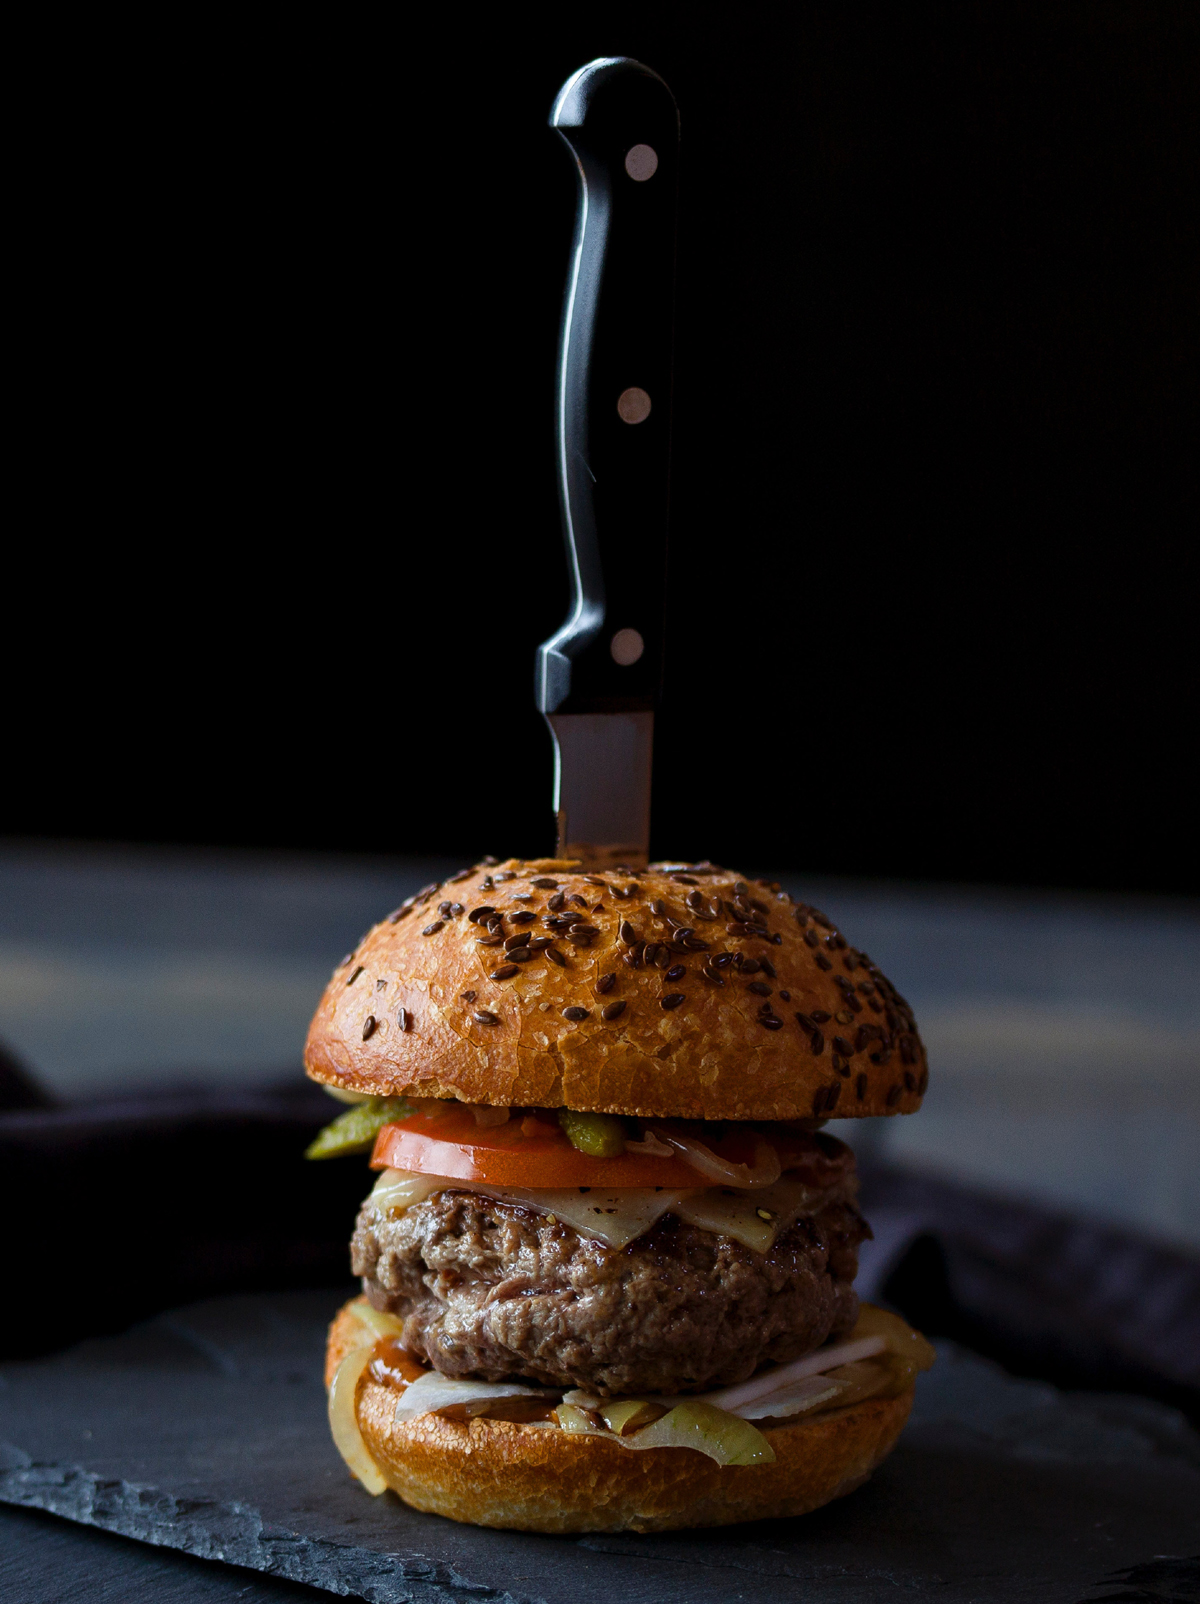 Burger With Knife